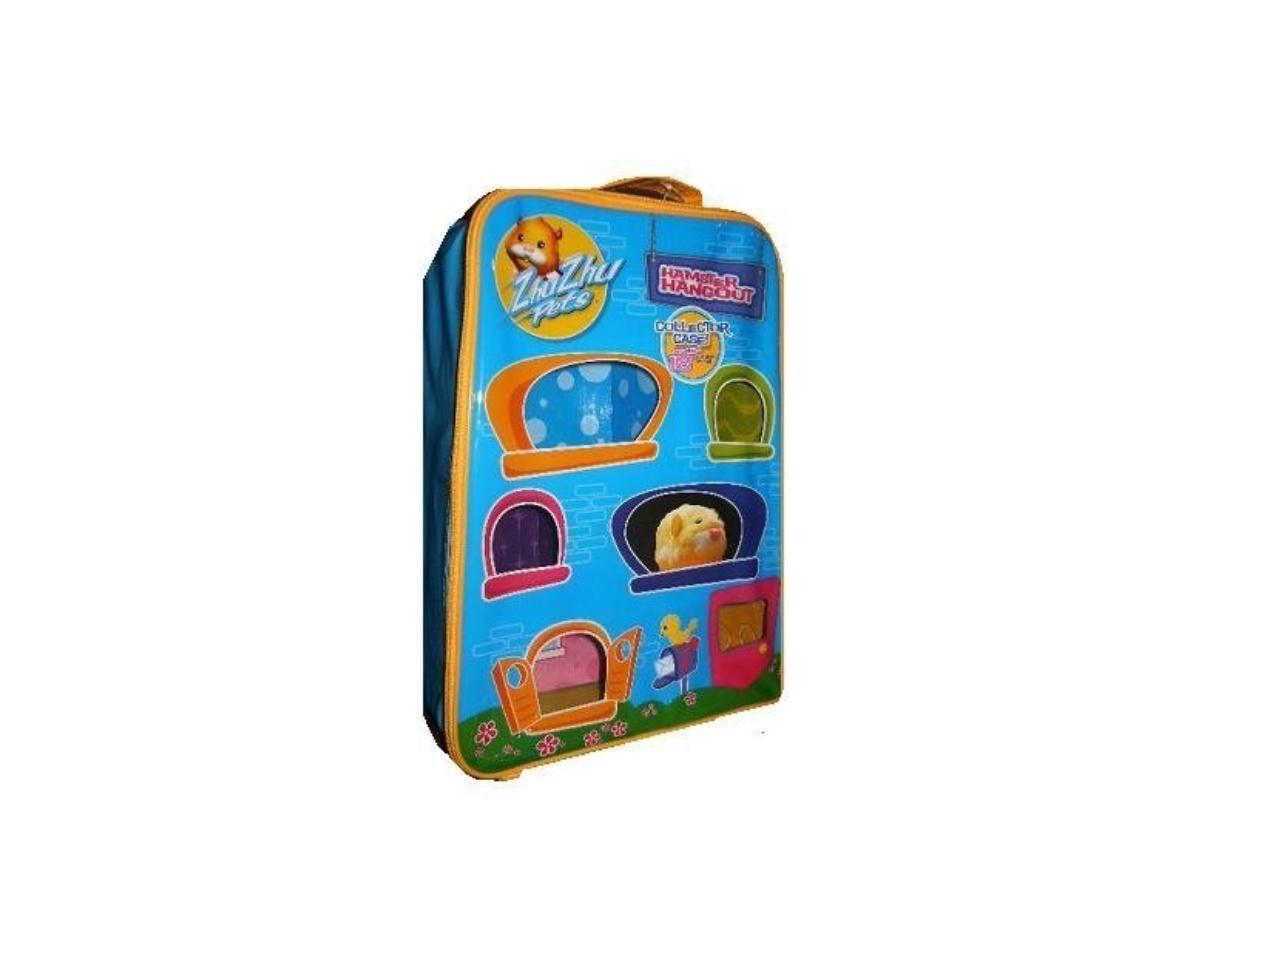 Details about   Zhu Zhu Pets Hamster Hangout Collectible Storage Case Includes 1 Hamster Working 